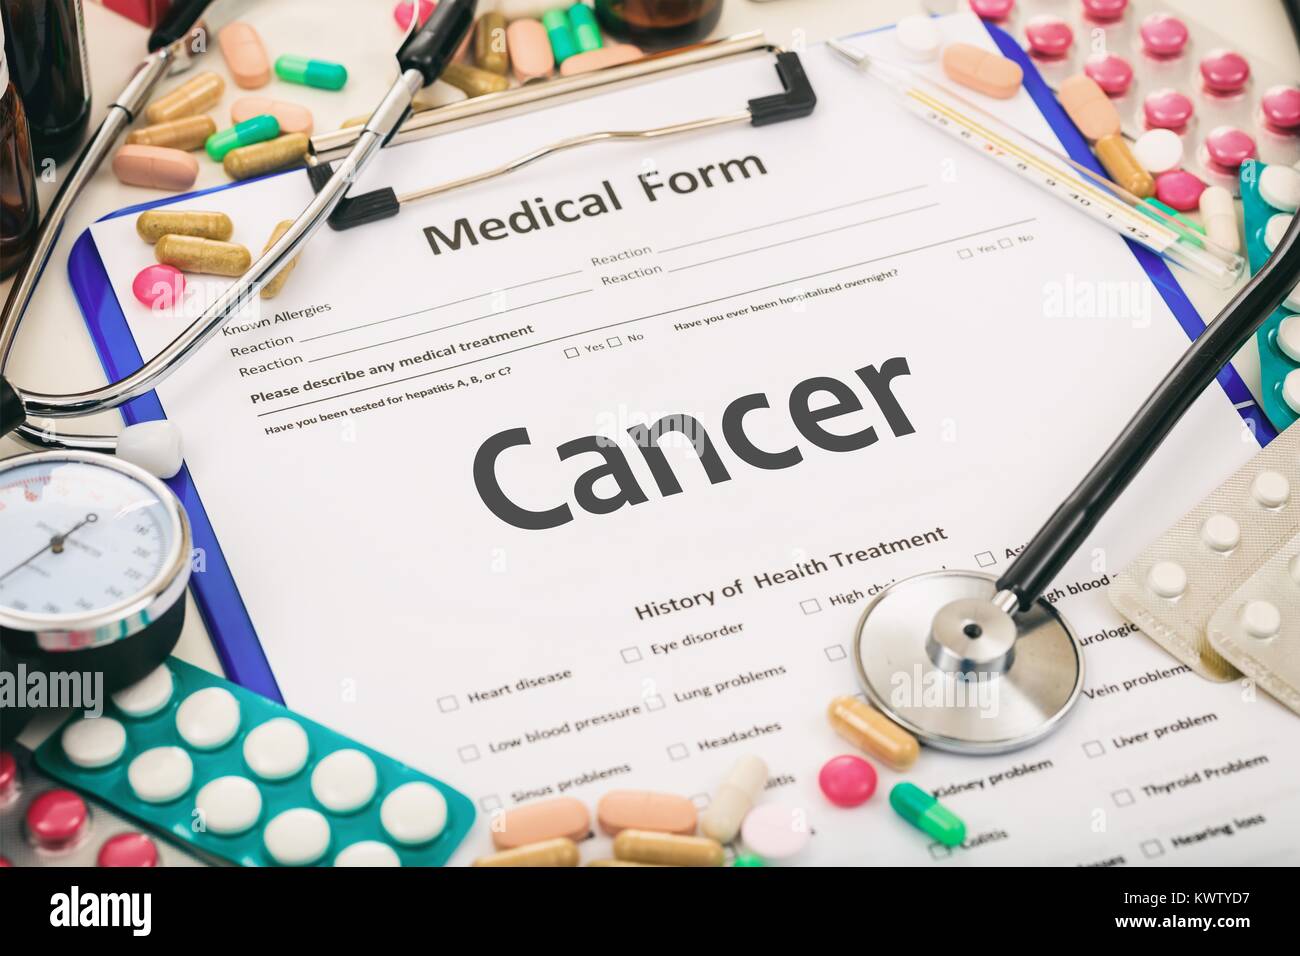 Medical form on a table, diagnosis cancer Stock Photo